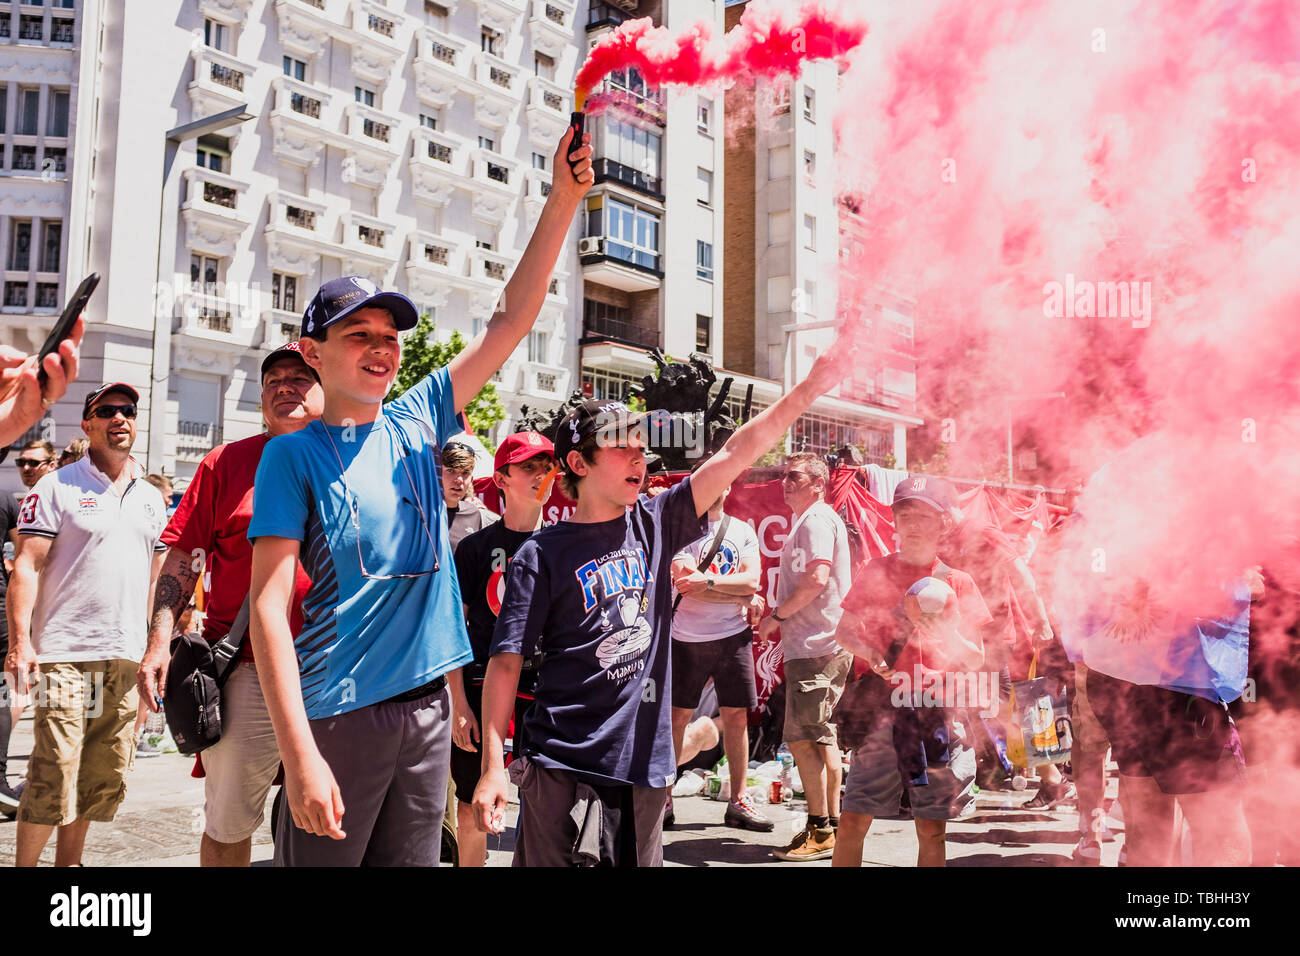 Young supporters burn flares at the Liverpool fan zone. Madrid hosts the UEFA Champions League Final between Liverpool and Tottenham Hotspur at the Wanda Metropolitano Stadium. Stock Photo